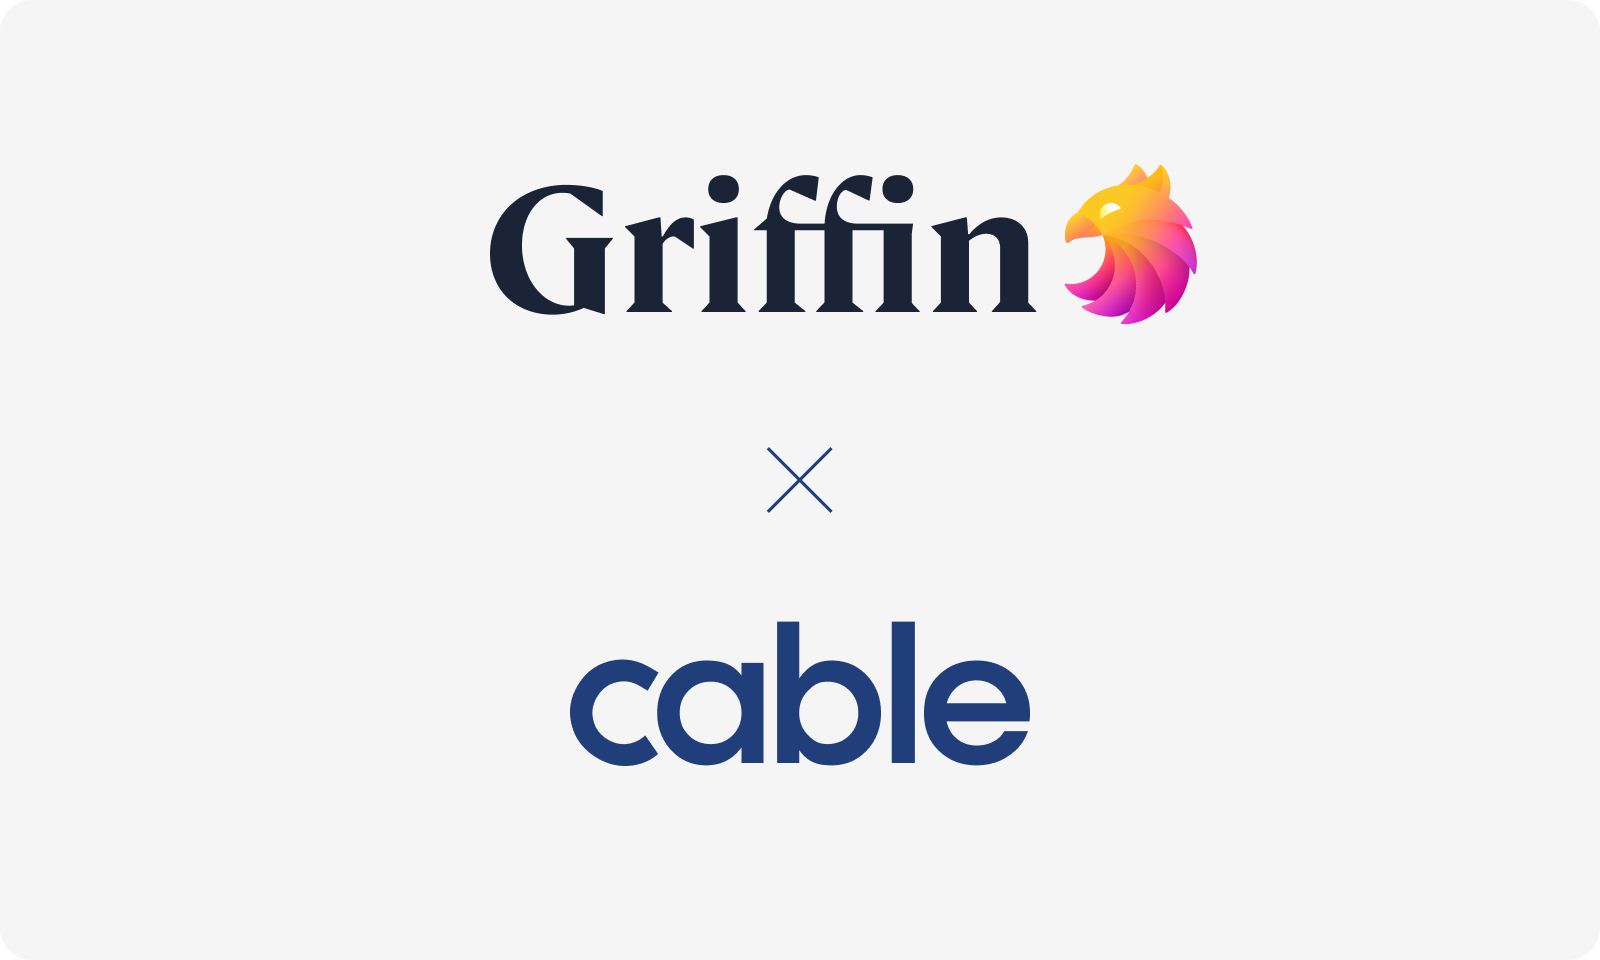 Cable and new UK bank Griffin partner to integrate robust automated financial crime assurance into Griffin’s BaaS platform